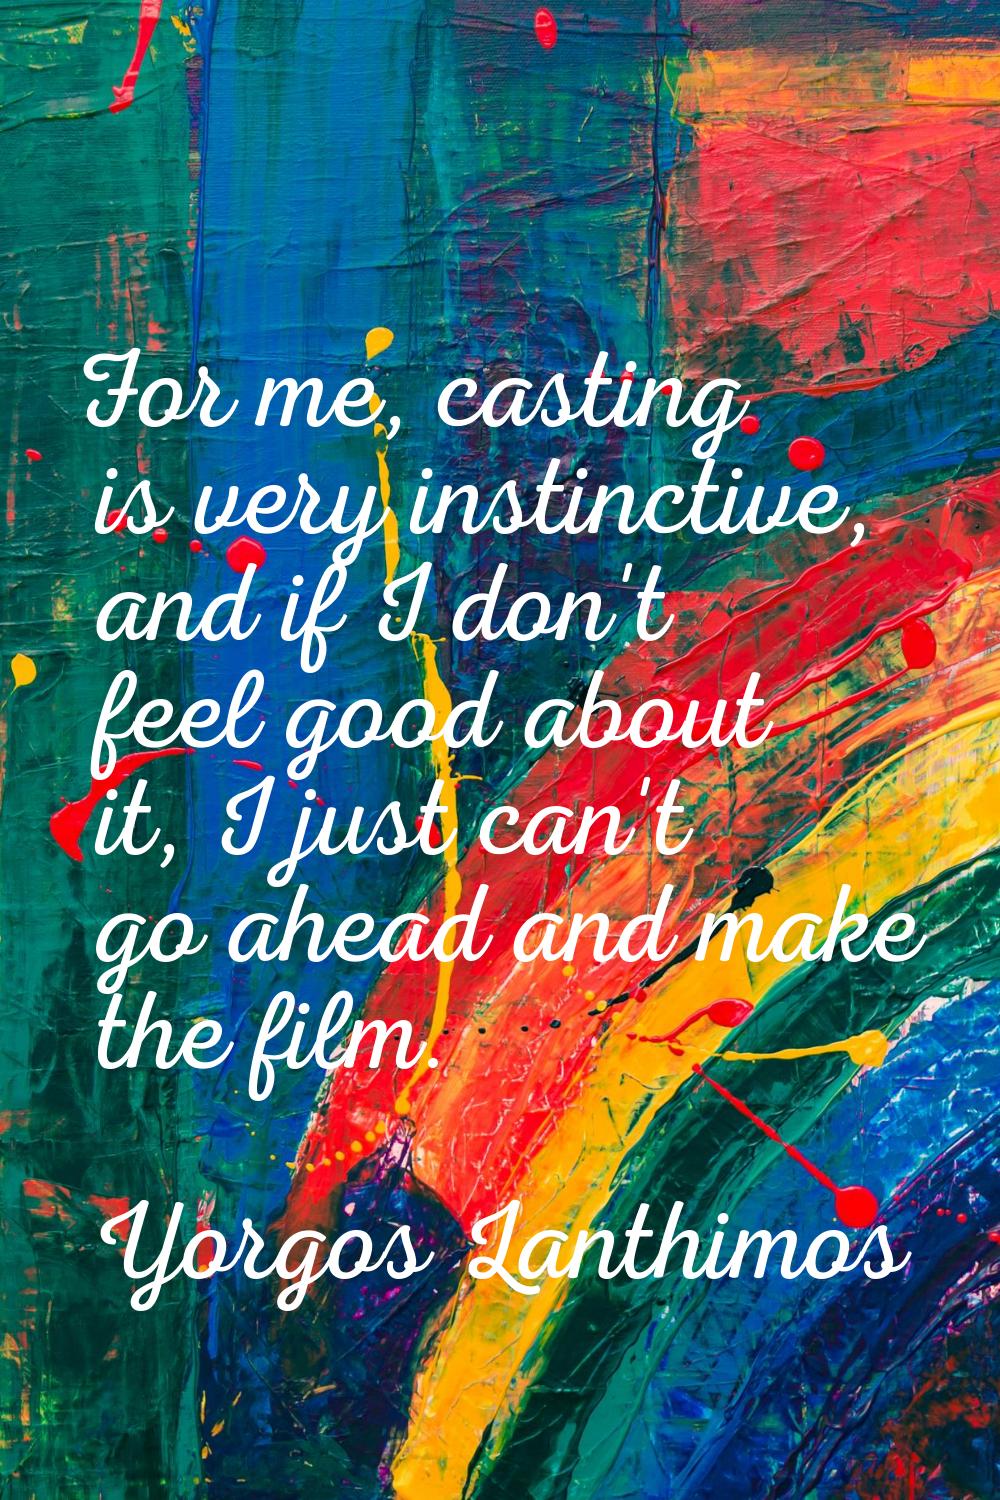 For me, casting is very instinctive, and if I don't feel good about it, I just can't go ahead and m